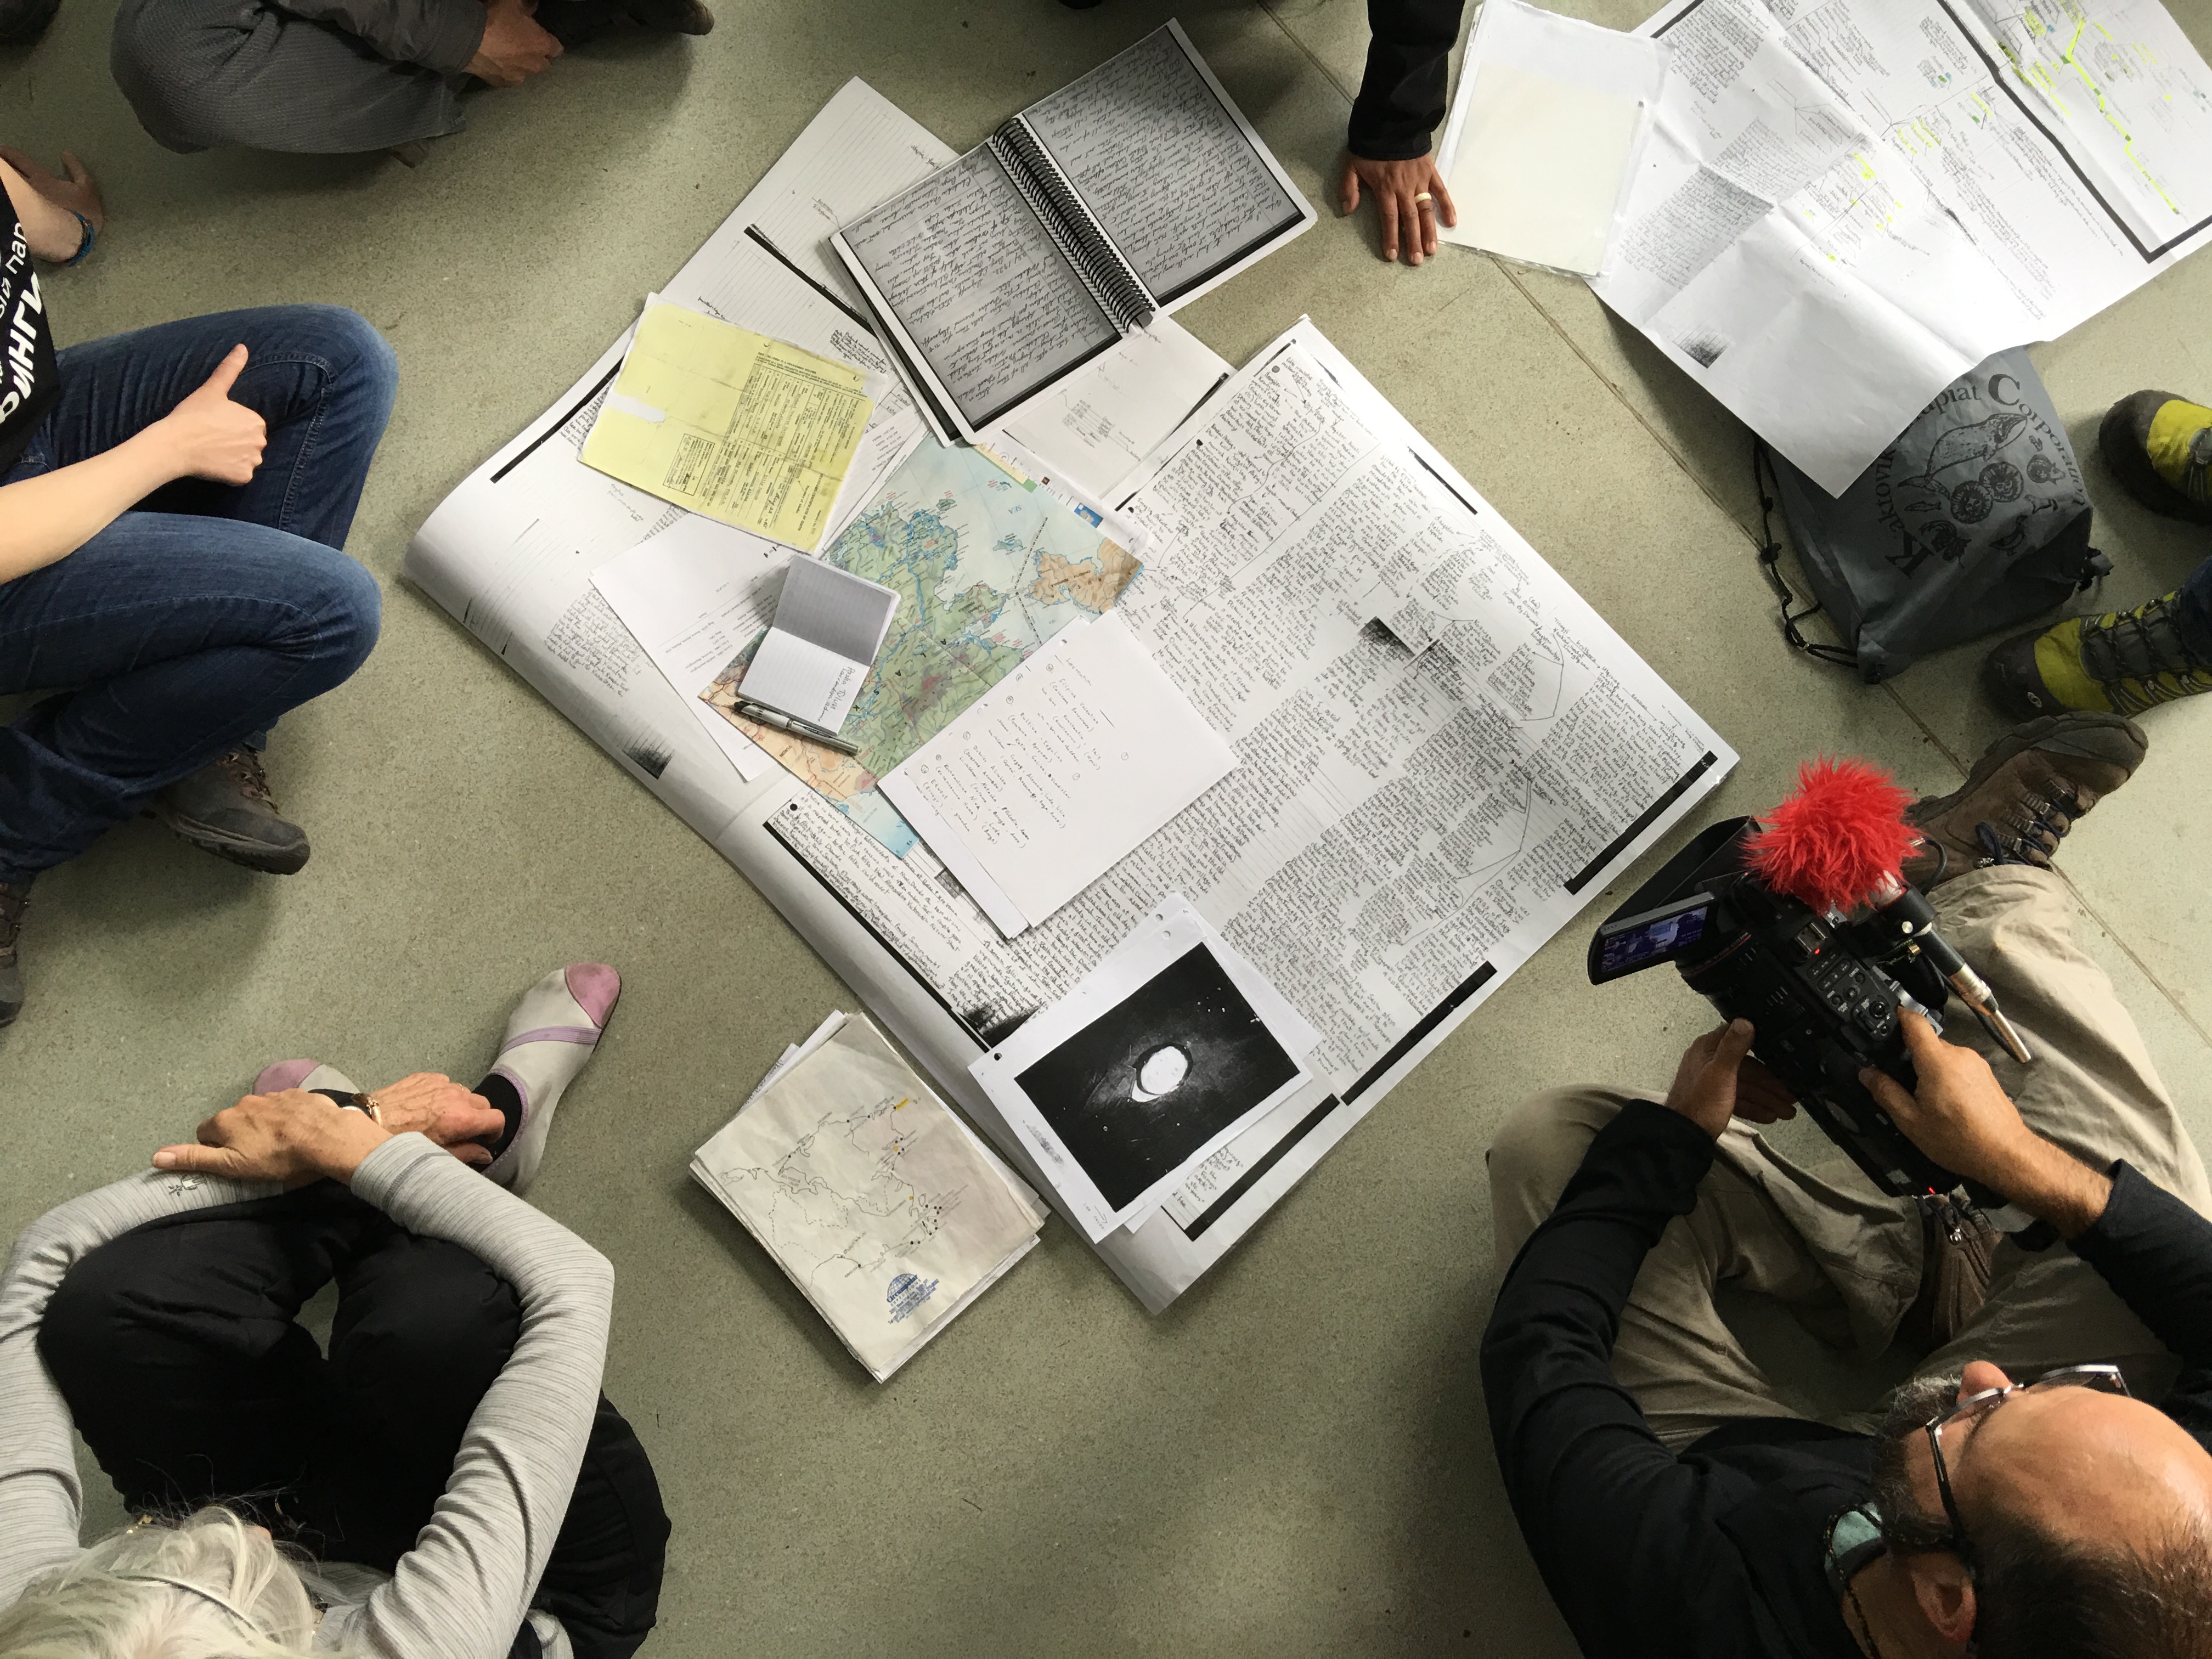 Members of the Diomede Island Family Reunion expedition examine an old family tree and other historical documents on the floor of the ivory carving school in Uelen, Chukotka, July 2016. (Kirsten Swann / Alaska Dispatch News)